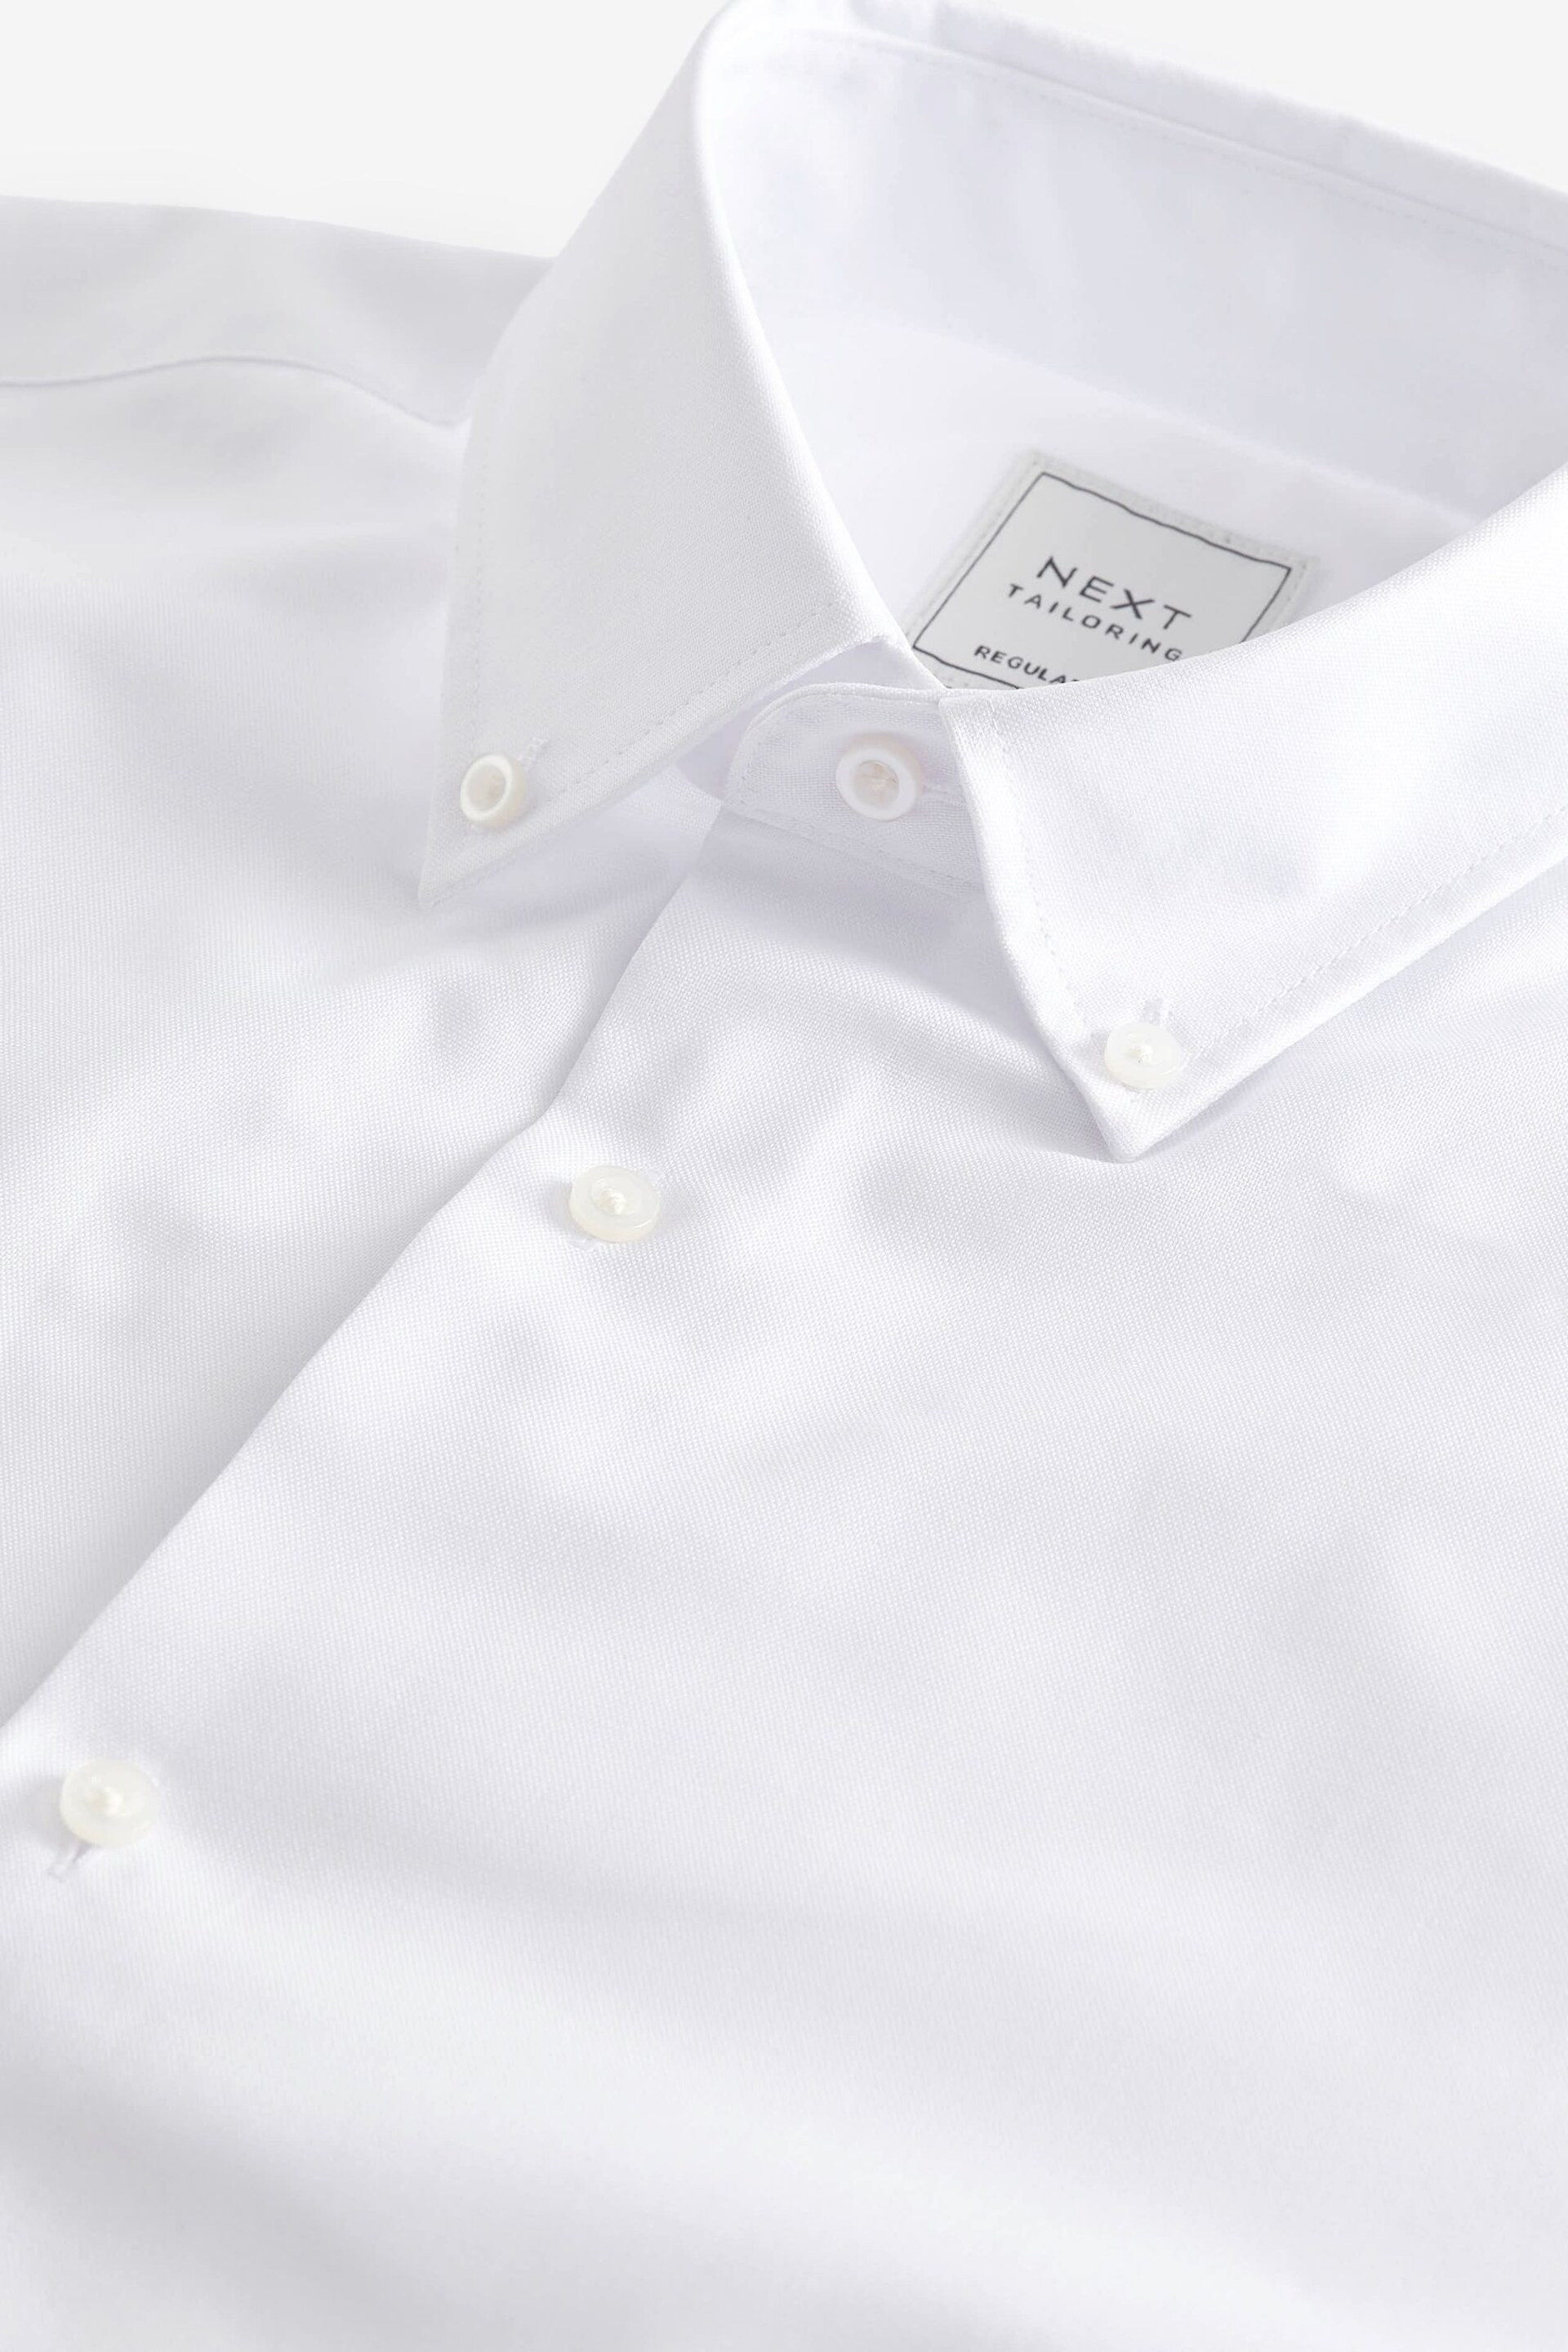 White Regular Fit Double Cuff Easy Care Oxford Shirt - Image 6 of 7